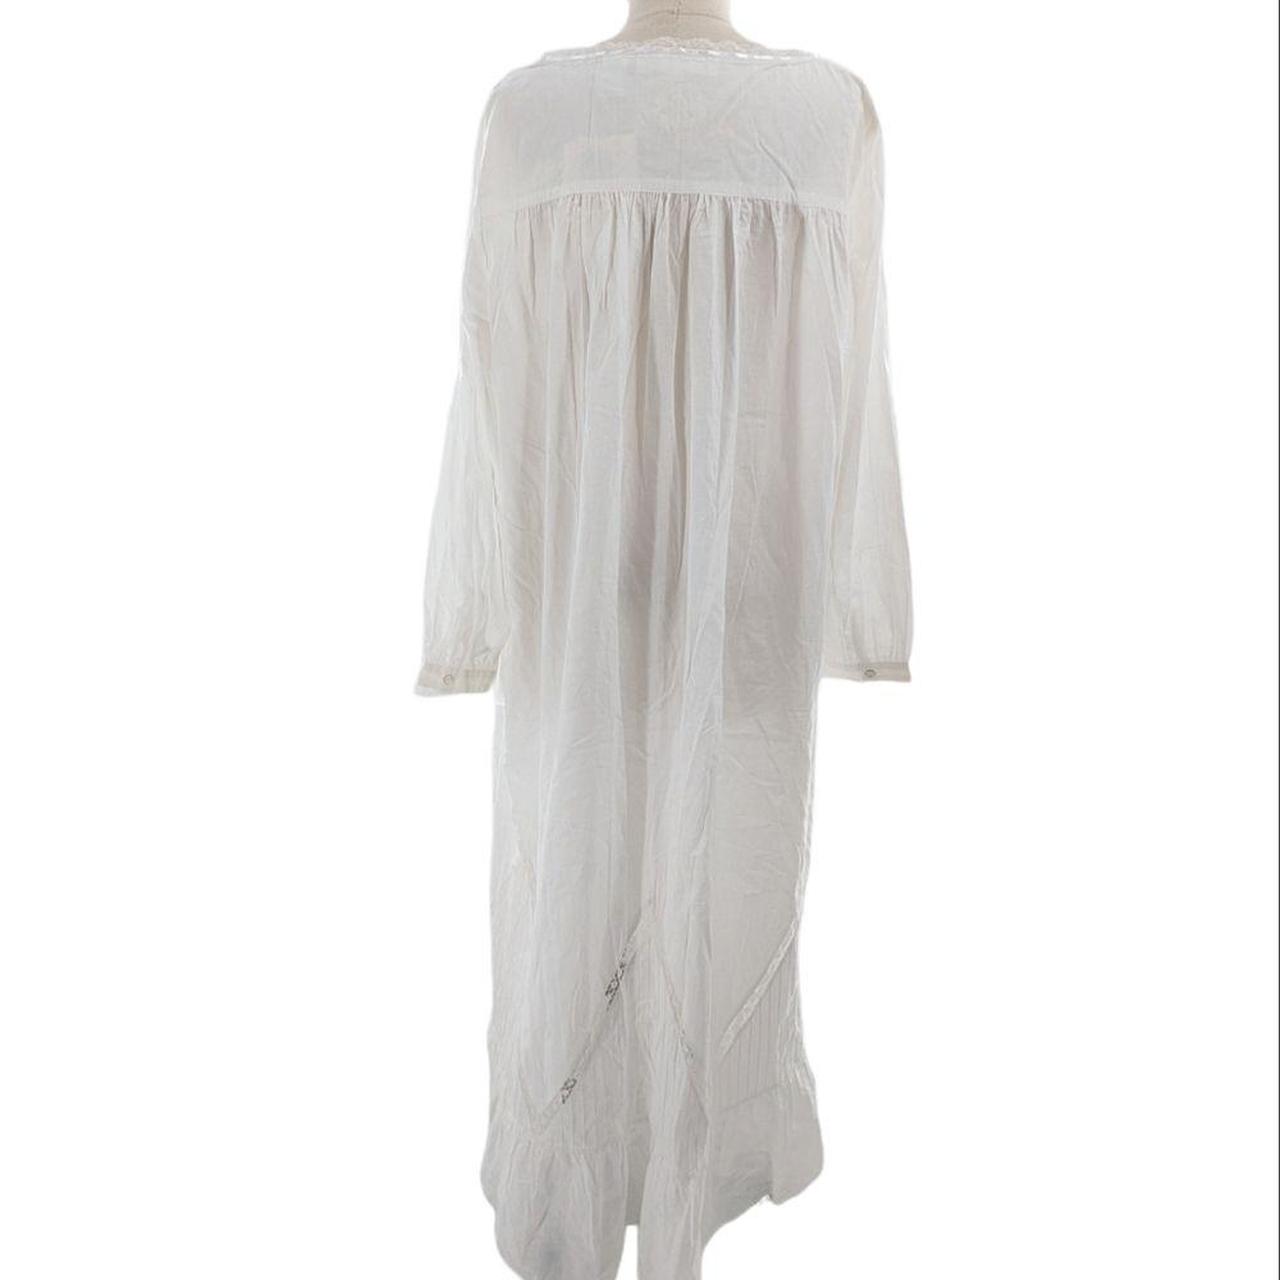 Ethereal #cottagecore cotton nightgown • gorgeous... - Depop